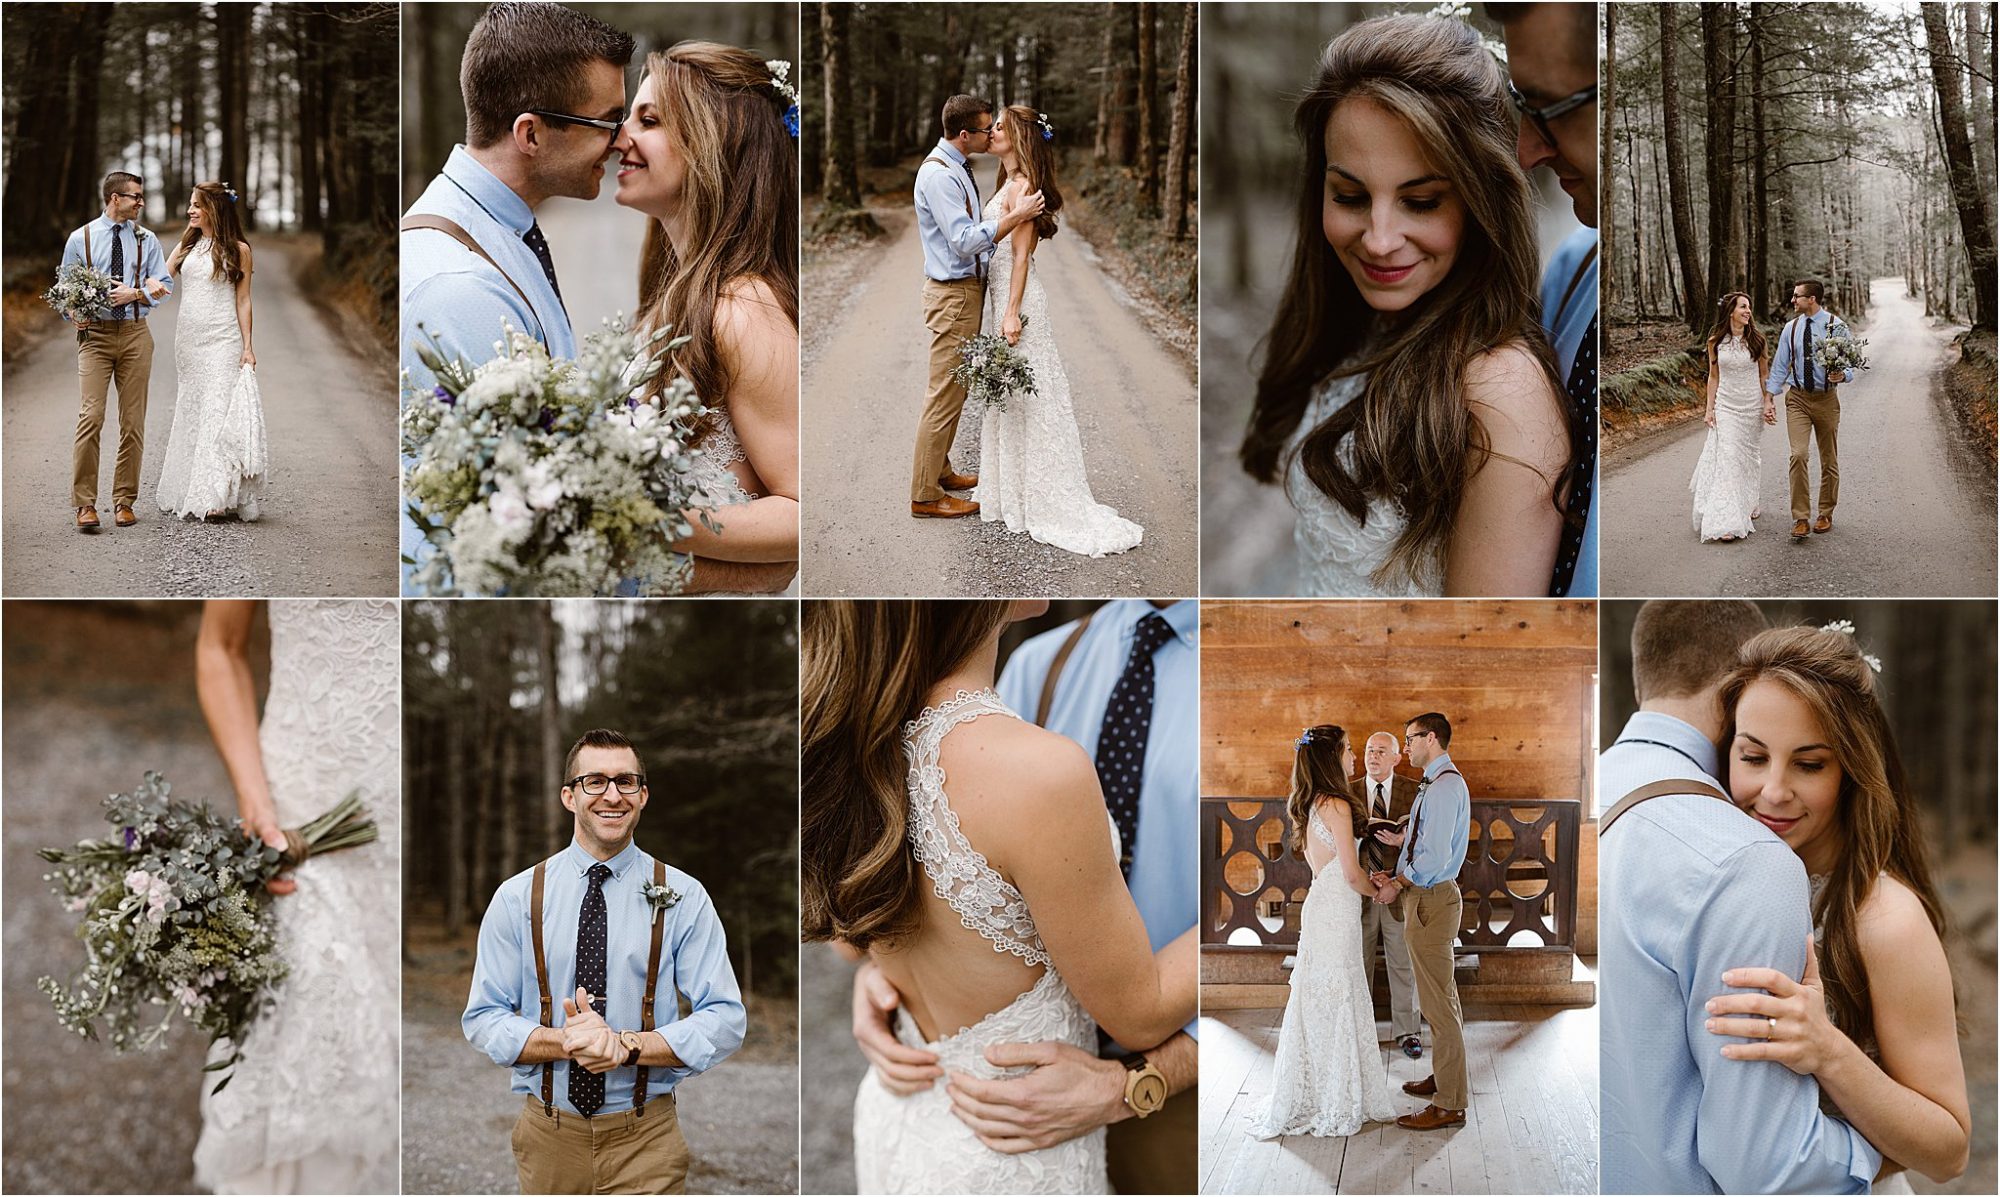 Cades Cove Wedding at Primitive Baptist Church in The Great Smoky Mountains National Park